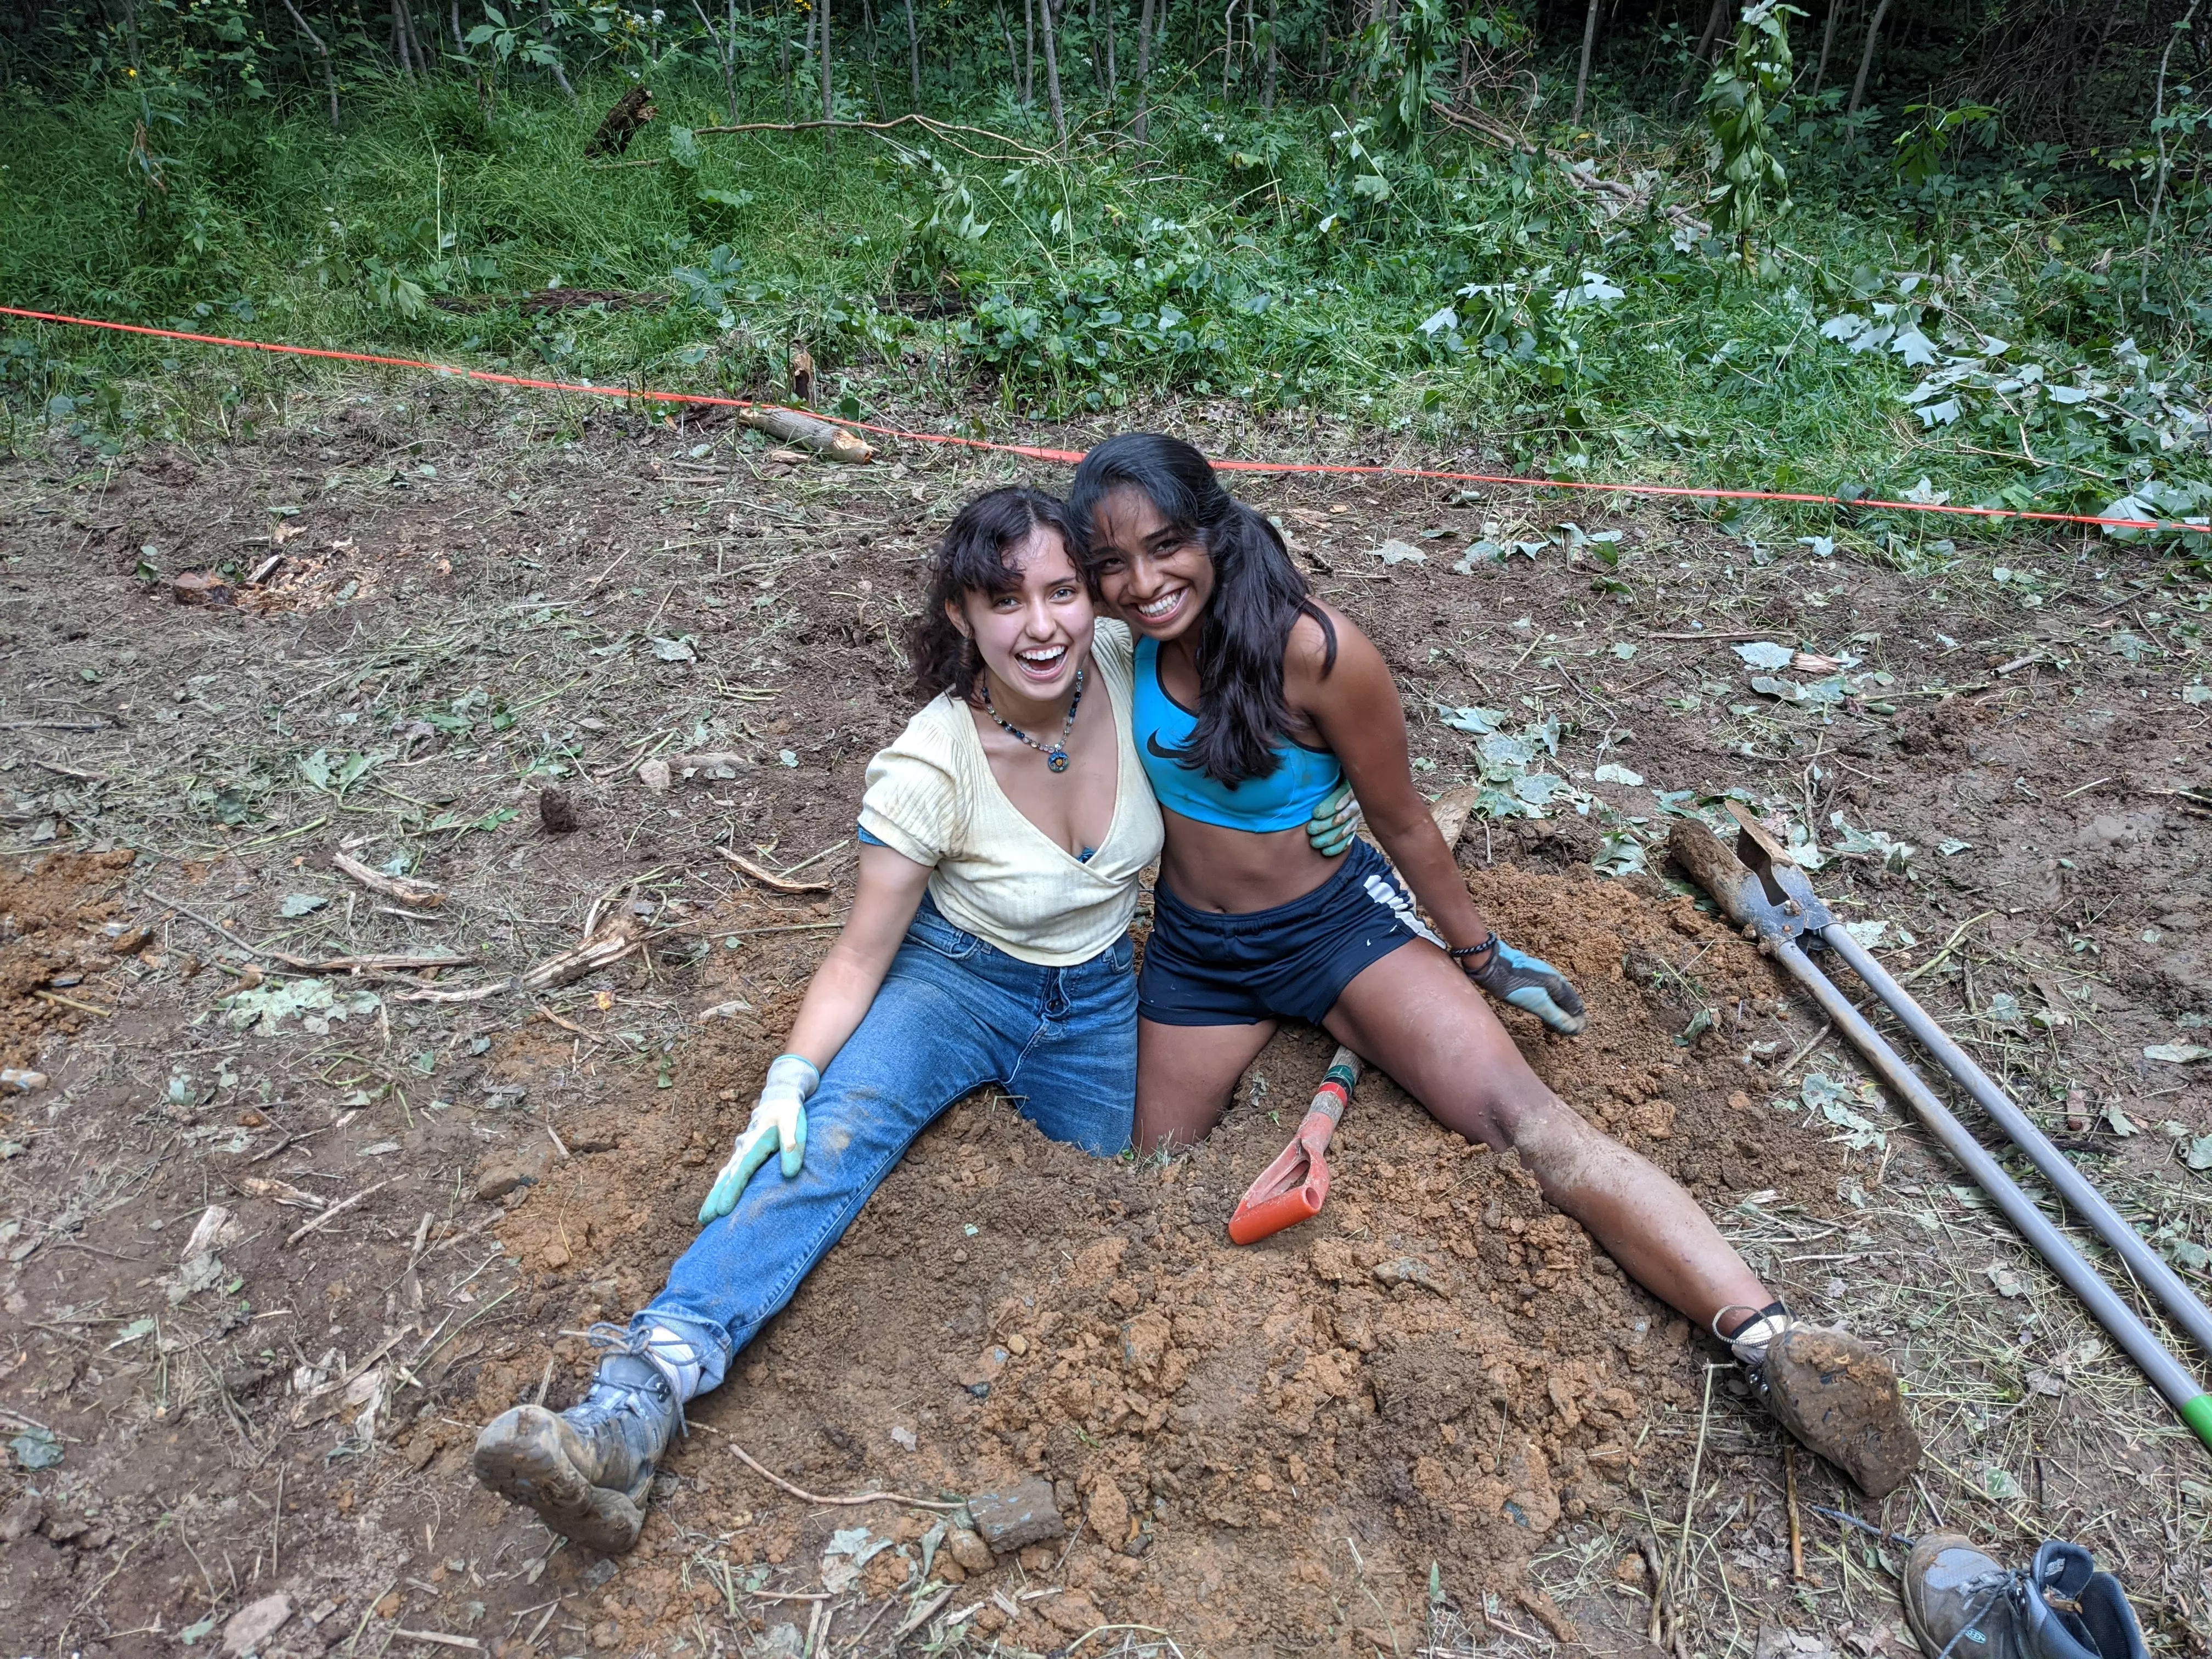 Odalys and a friend, working on digging a hole!